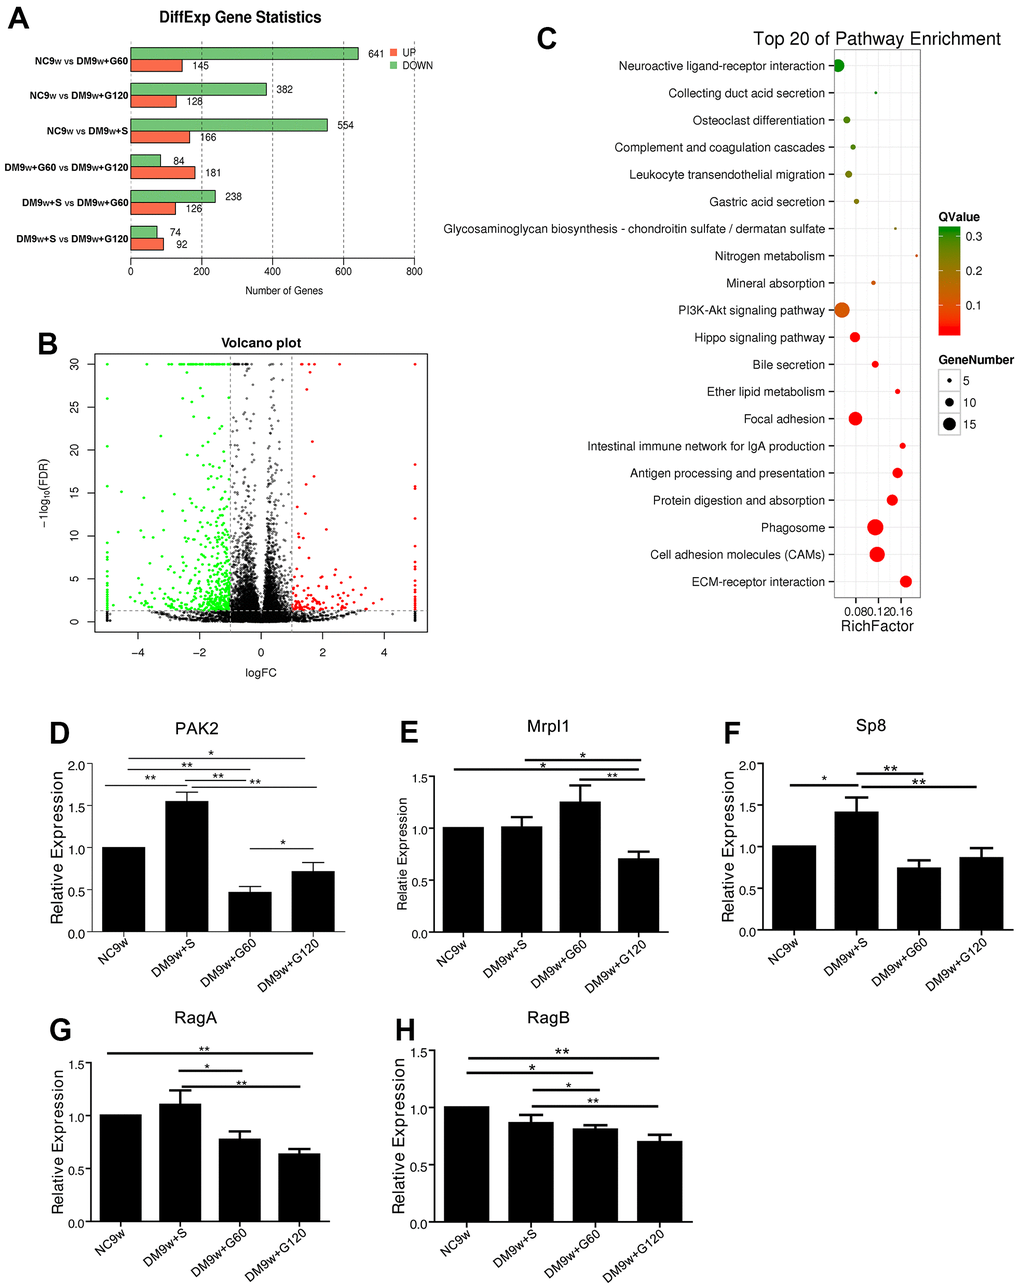 The transcriptomic profile of Gastrodin intervention on the hippocampus of diabetic rats and further confirmation. (A) Differentially expressed genes among NC9w, DM9w+S, DM9w+G60 and DM9w+G120 group. (B) Volcano plot of all genes based on their log2 fold-change and adjusted P-values between NC9w and DM9w+S group. Differentially expressed genes were classified at an adjusted P-value of C) The KEGG pathways enriched between NC9w and DM9w+S group. The rich factor refers to the ratio of the number of DEGs to the number of total annotated genes in a certain pathway. (D–H) qPCR analysis of the mRNA expression of PAK2 (D) Mrpl1 (E) Sp8 (F) RagA (G) and RagB (H) in the hippocampus of the NC9w, DM9w+S, DM9w+G60 and DM9w+G120 groups. *p 